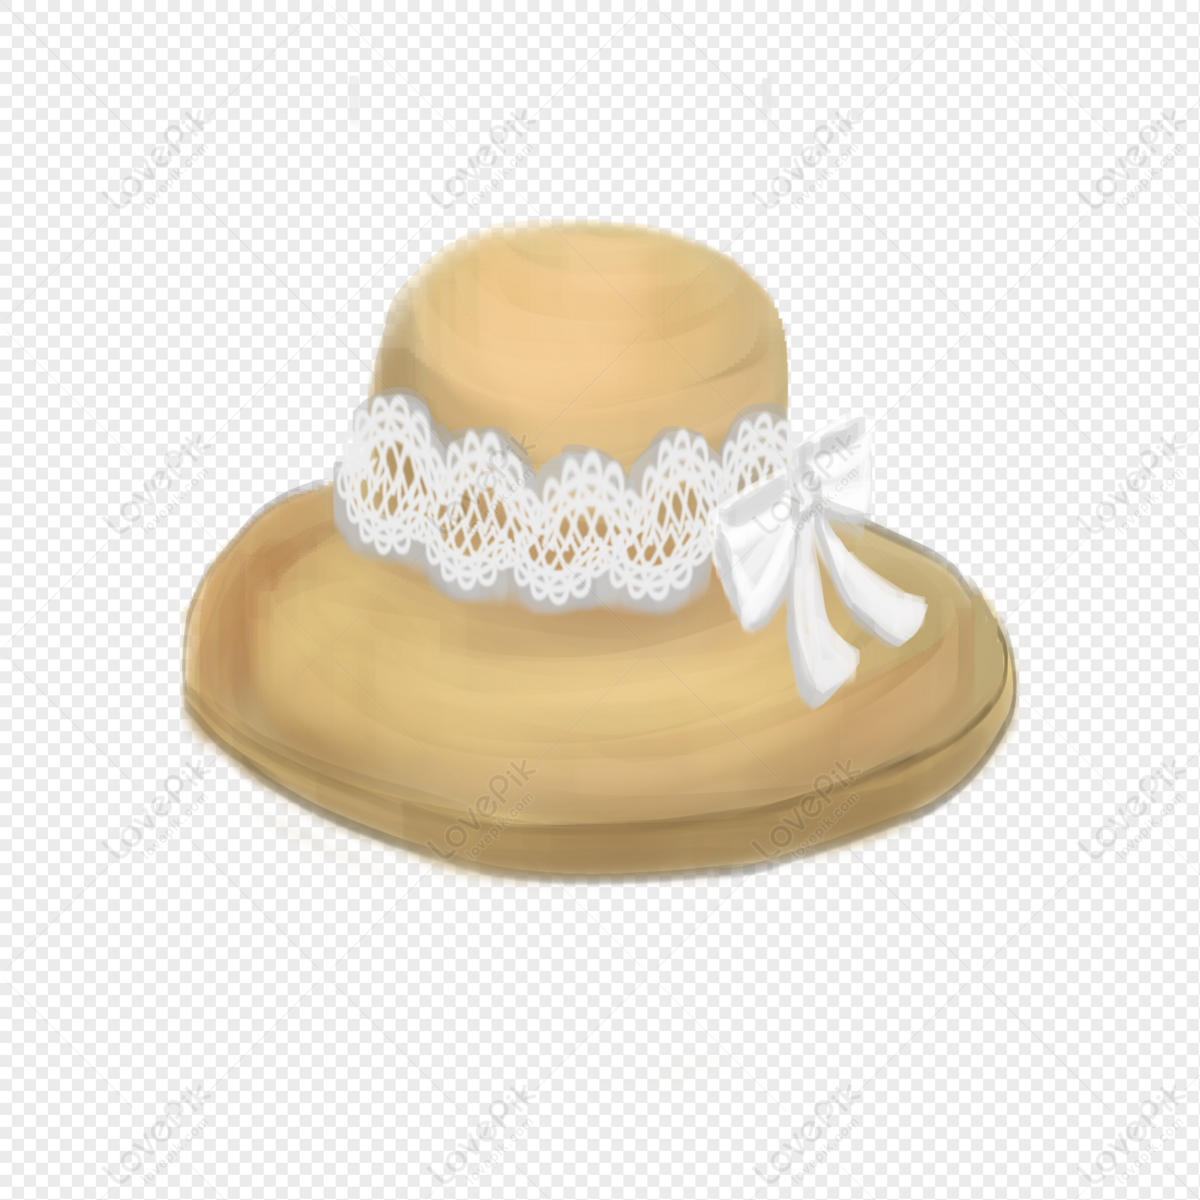 Hat, Hat, Food Cloche, Summer Free PNG And Clipart Image For Free ...